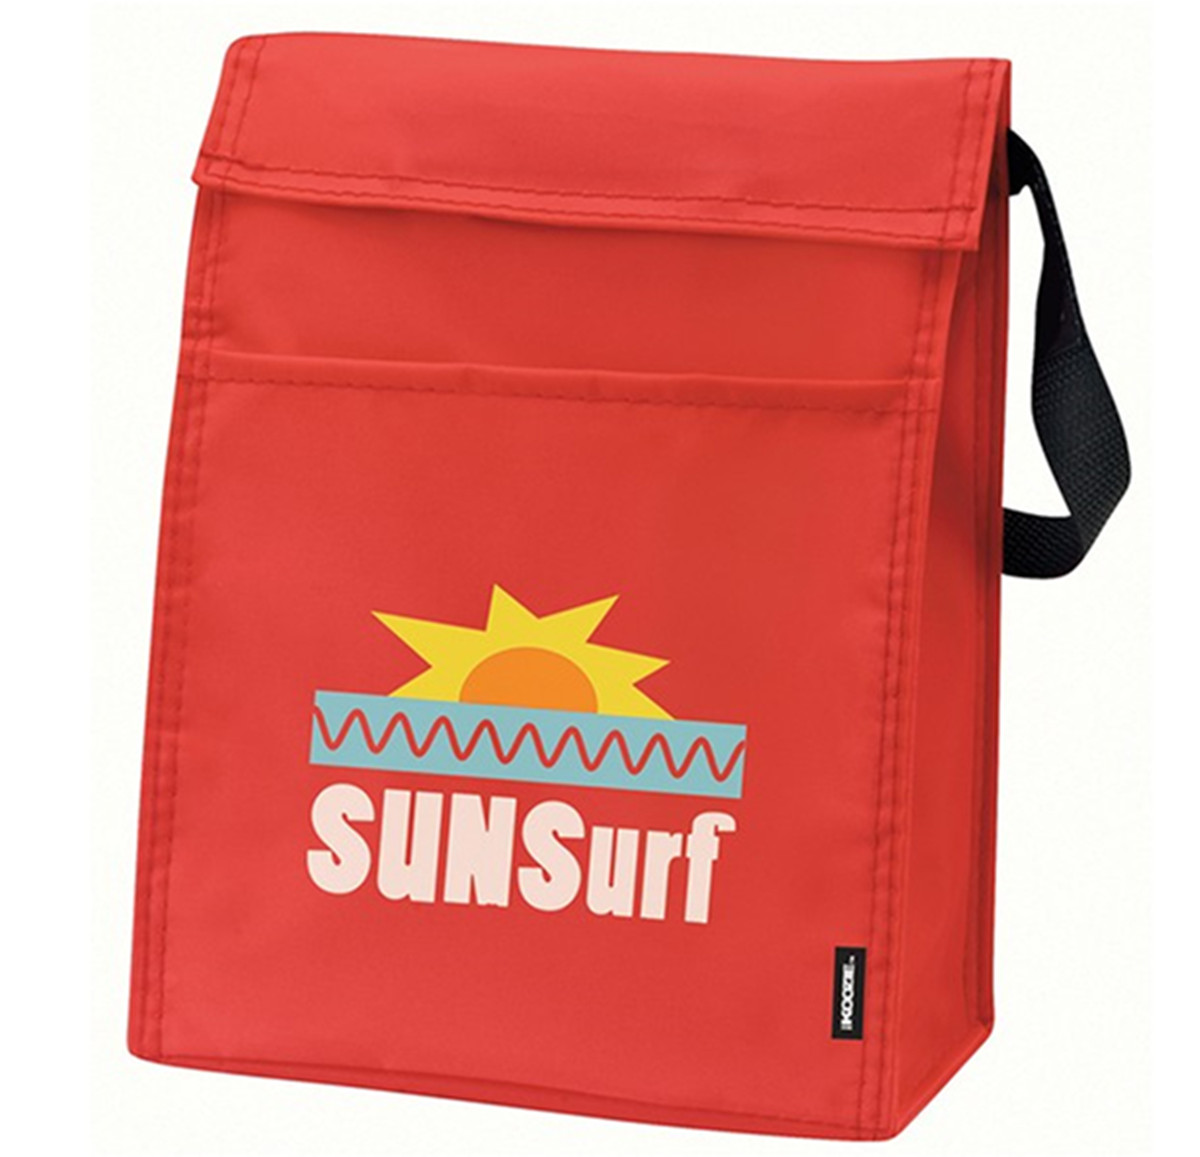 Promotional insulated Cooler bags,Promotional Insulated Cooler Bags Supplier